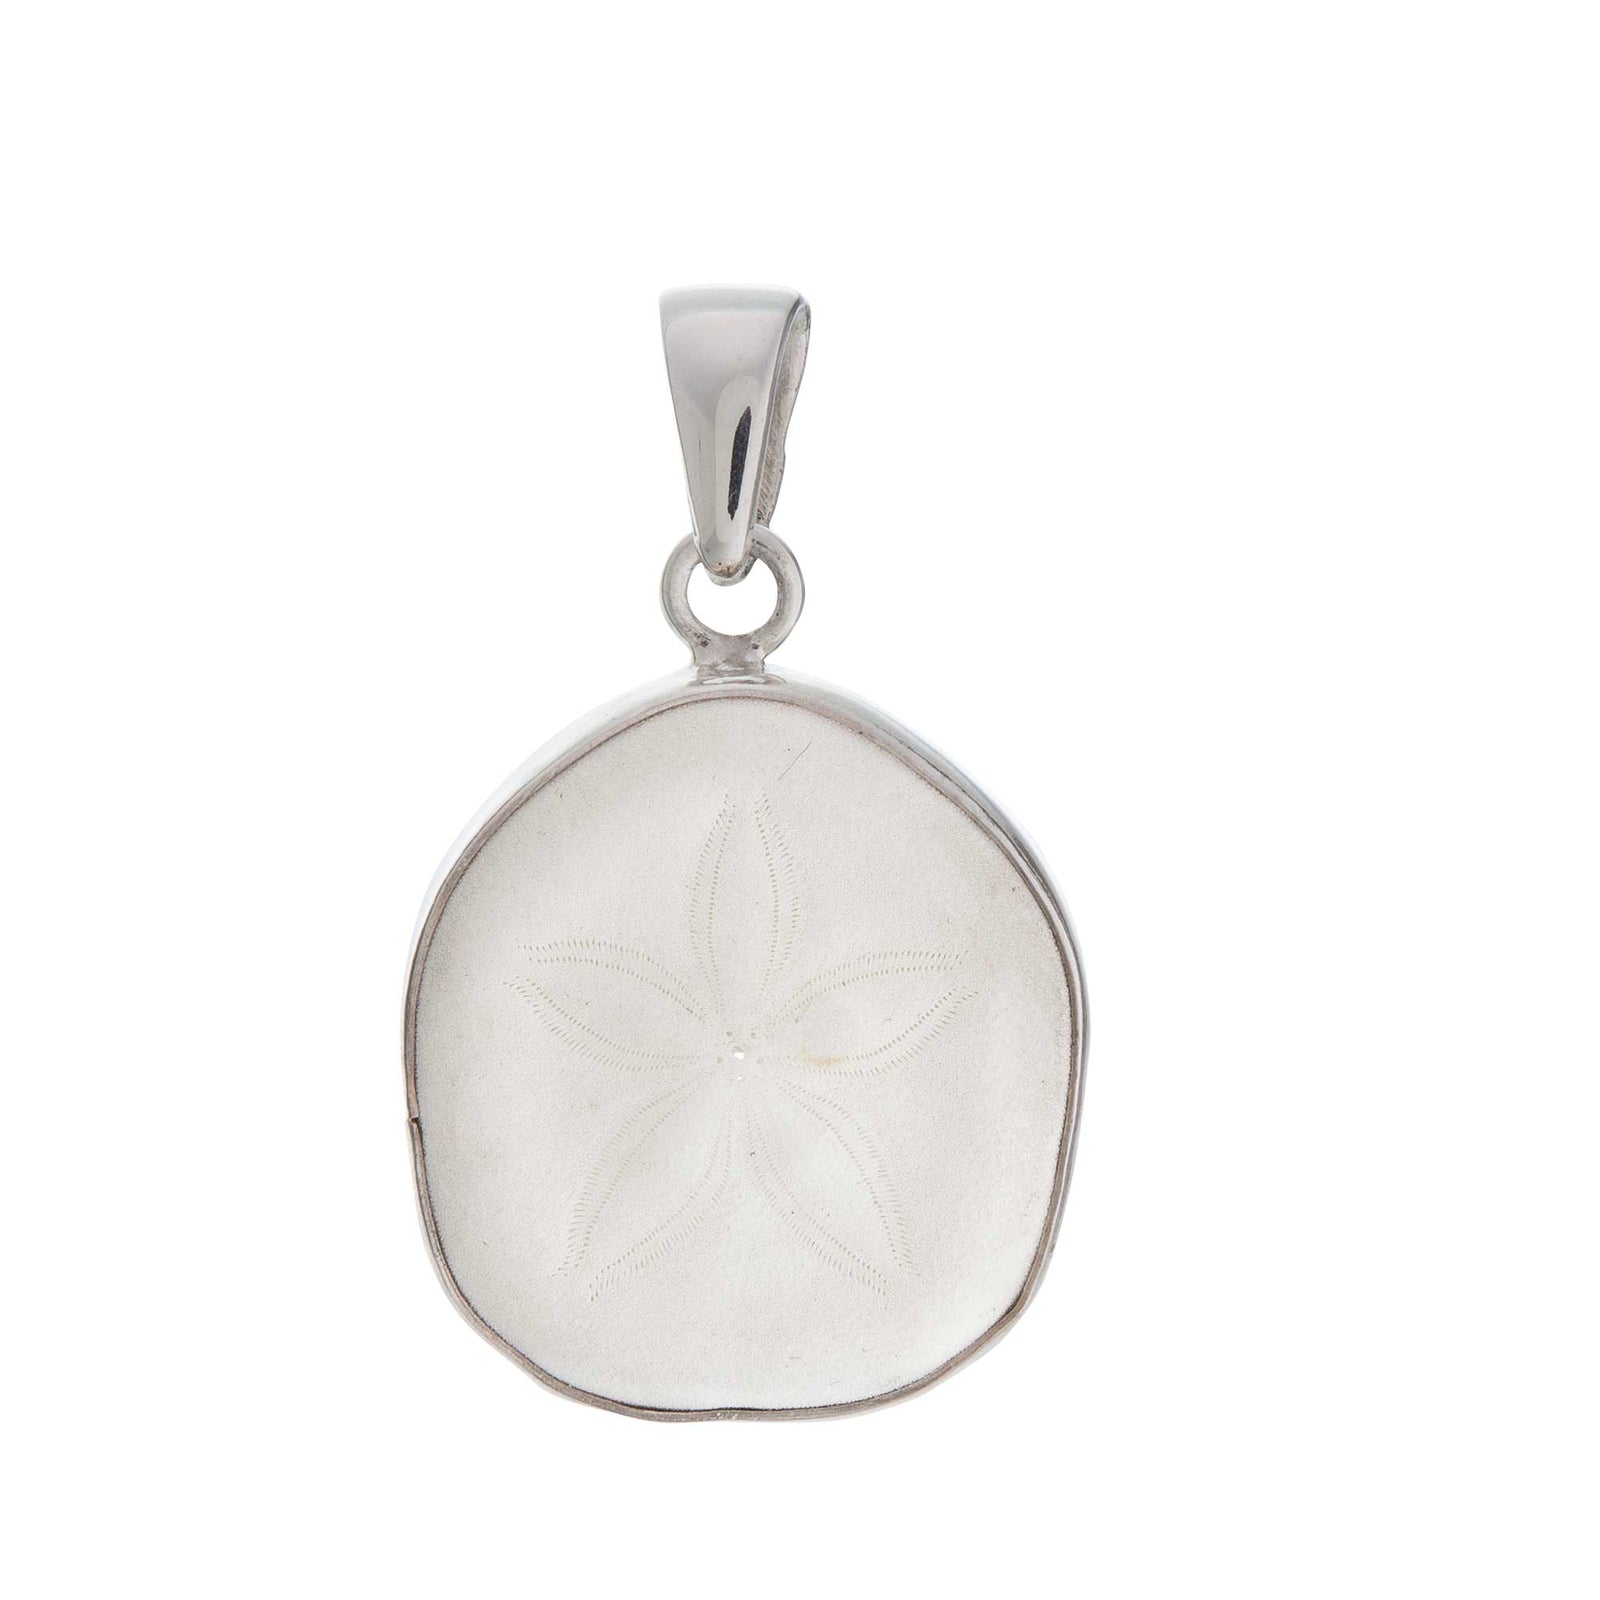 Sand Dollar Pendent Necklace Silver Tone Chain Spring ring Sea Shell Ocean  Beach | eBay